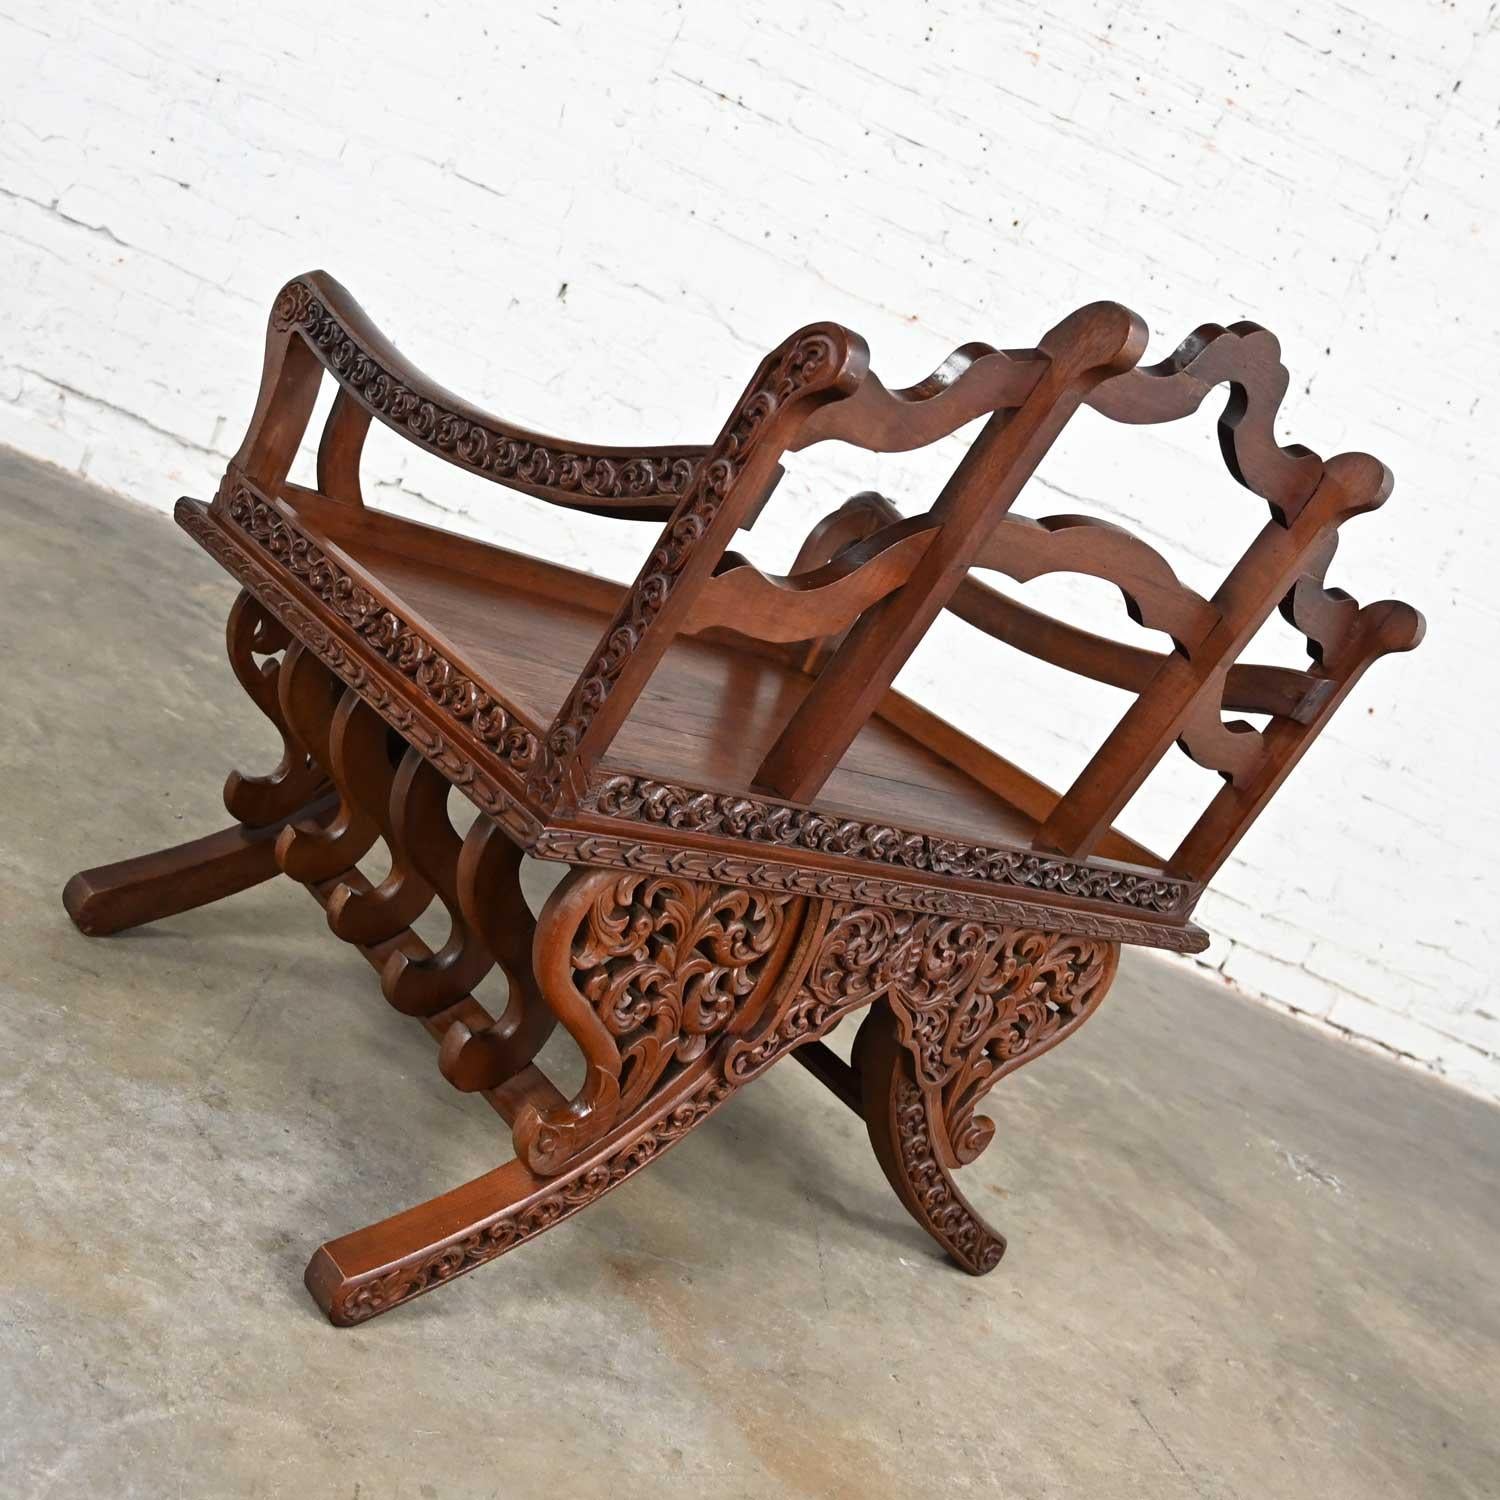 20th Century Chinoiserie Hand Carved Rosewood Howdah Elephant Saddle Chair Bangkok Thailand For Sale